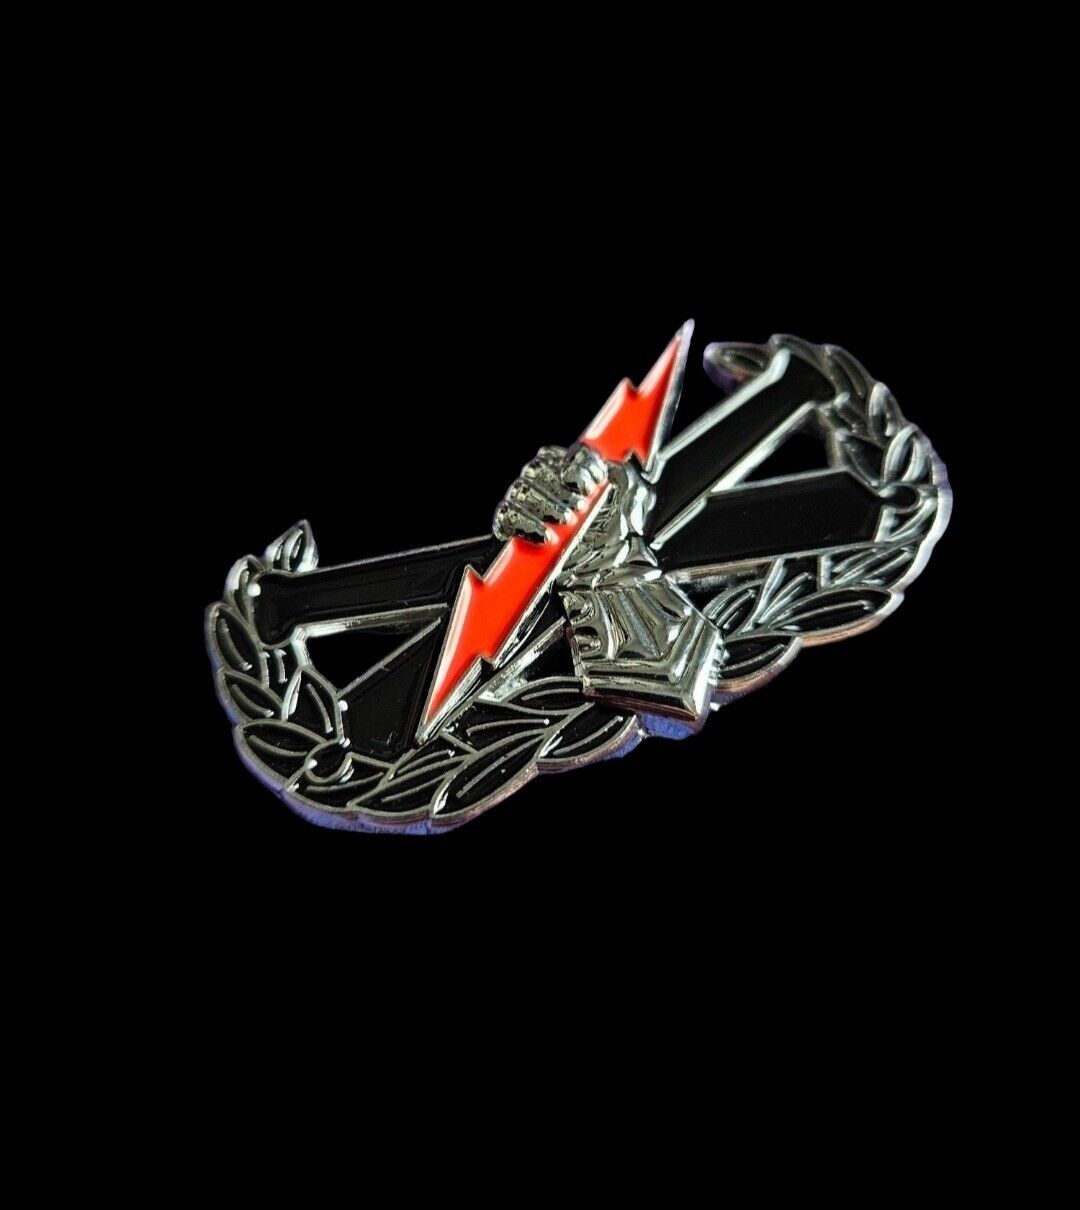 Army FISTER Colored Metal Vehicle Badge 3d Weatherproof